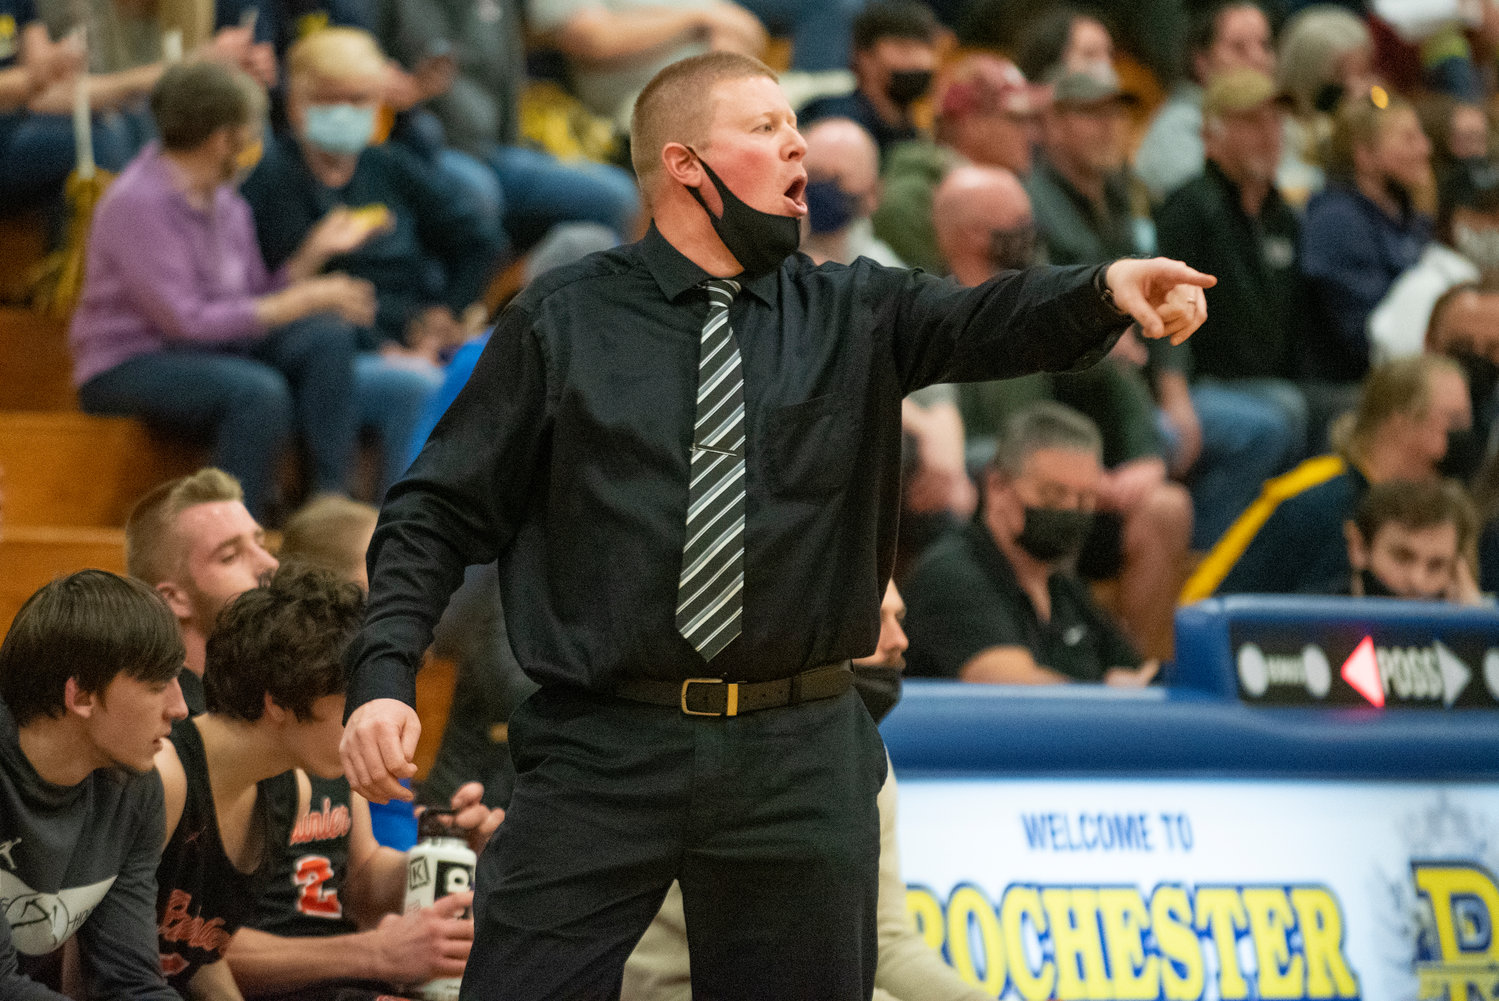 Rainier coach Ben Sheaffer calls out instructions to his team during a district playoff game against Ilwaco on Feb. 11.